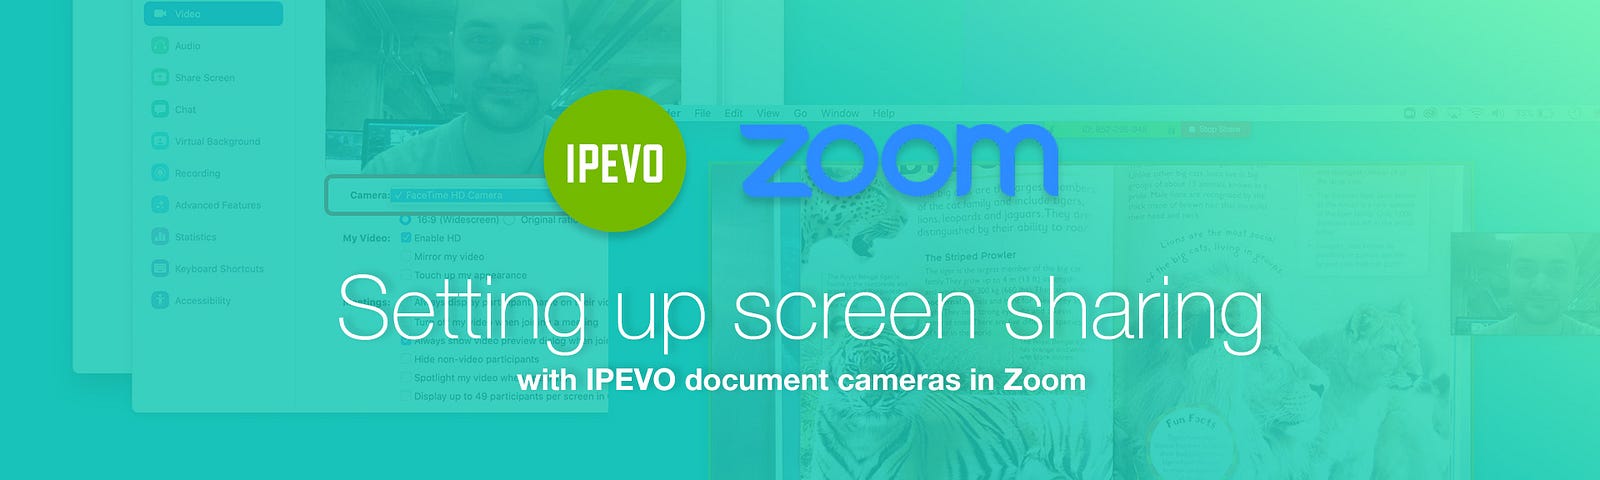 Setting up screen sharing with IPEVO document cameras in Zoom